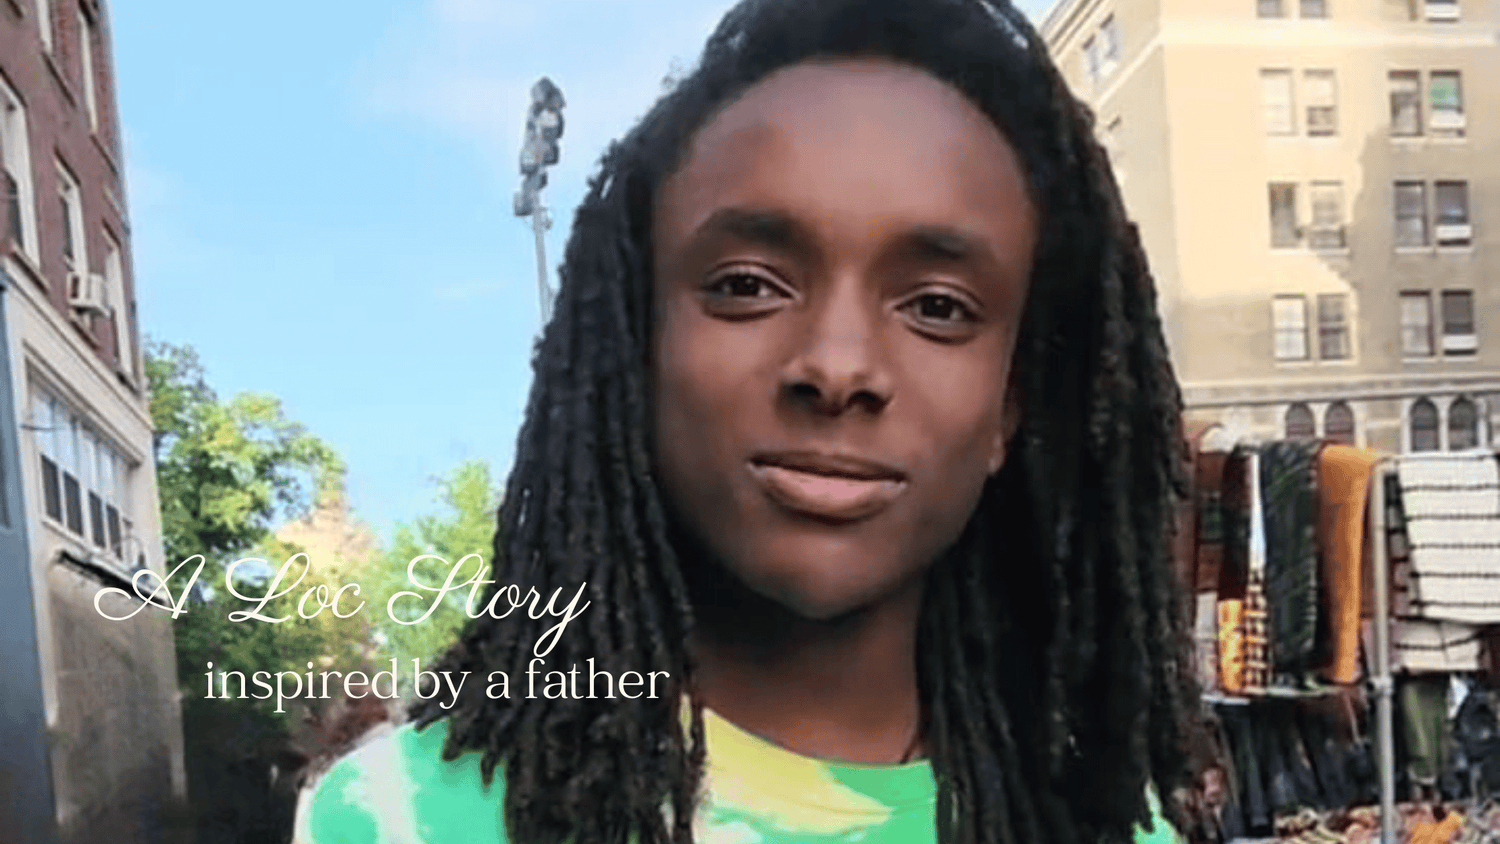 As father as son: A Loc Journey: Inspired By A Father